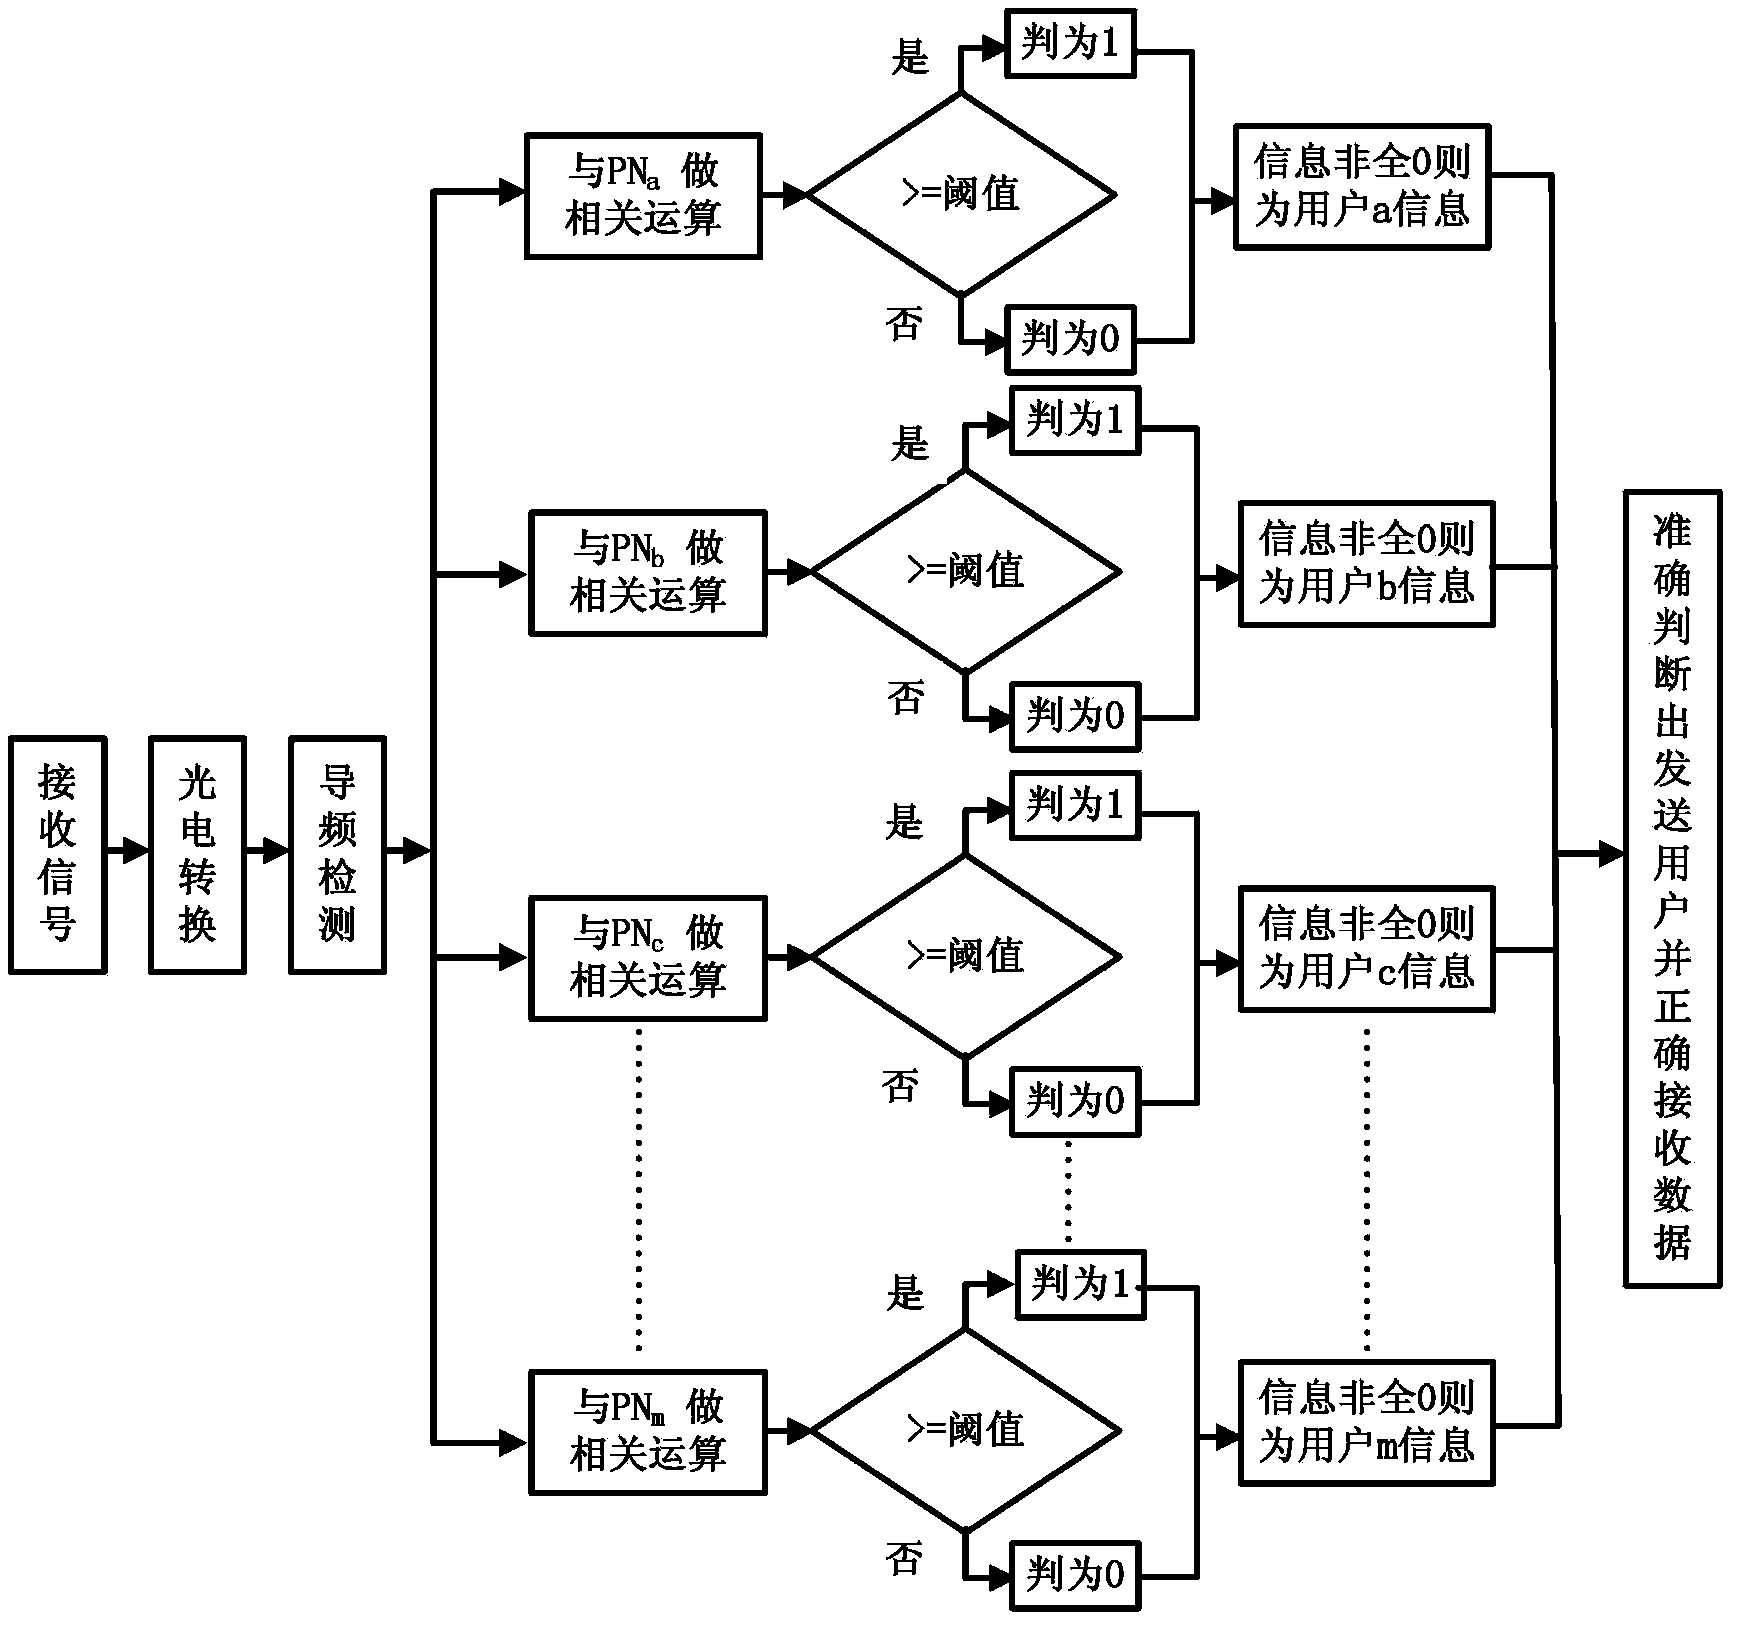 Method and system for realizing multi-user spread spectrum communication